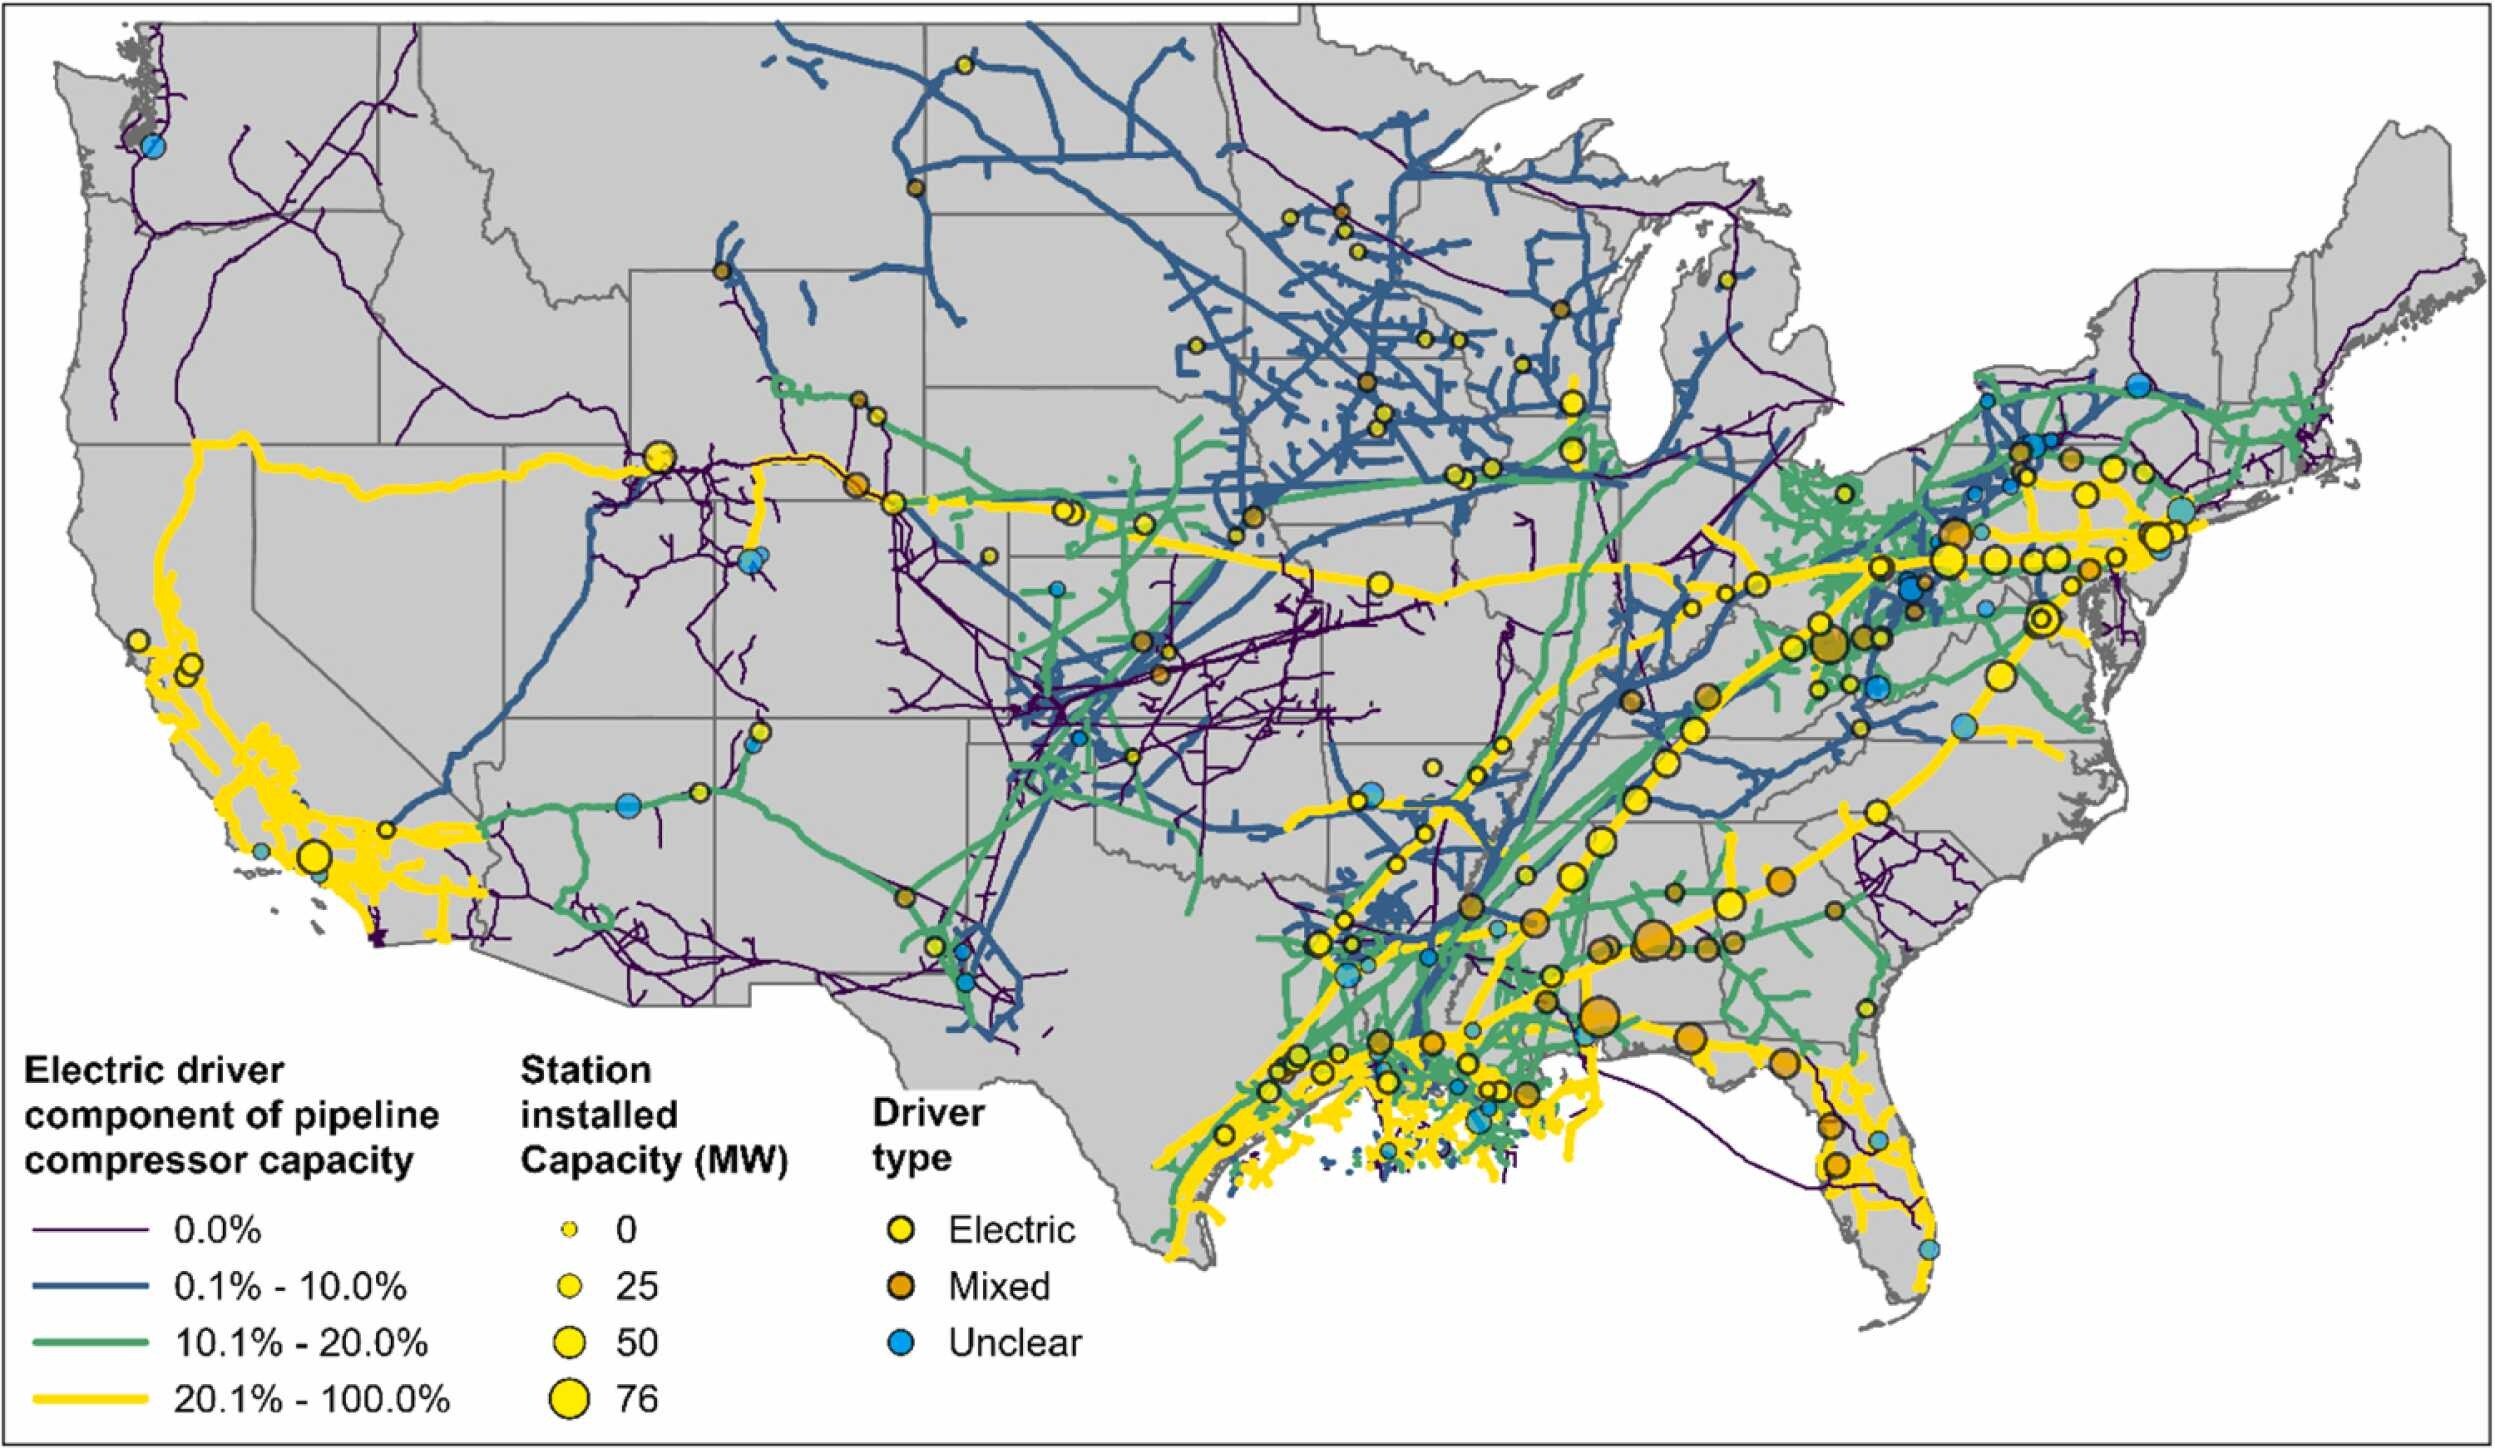 US natural gas pipelines vulnerable to electric outages